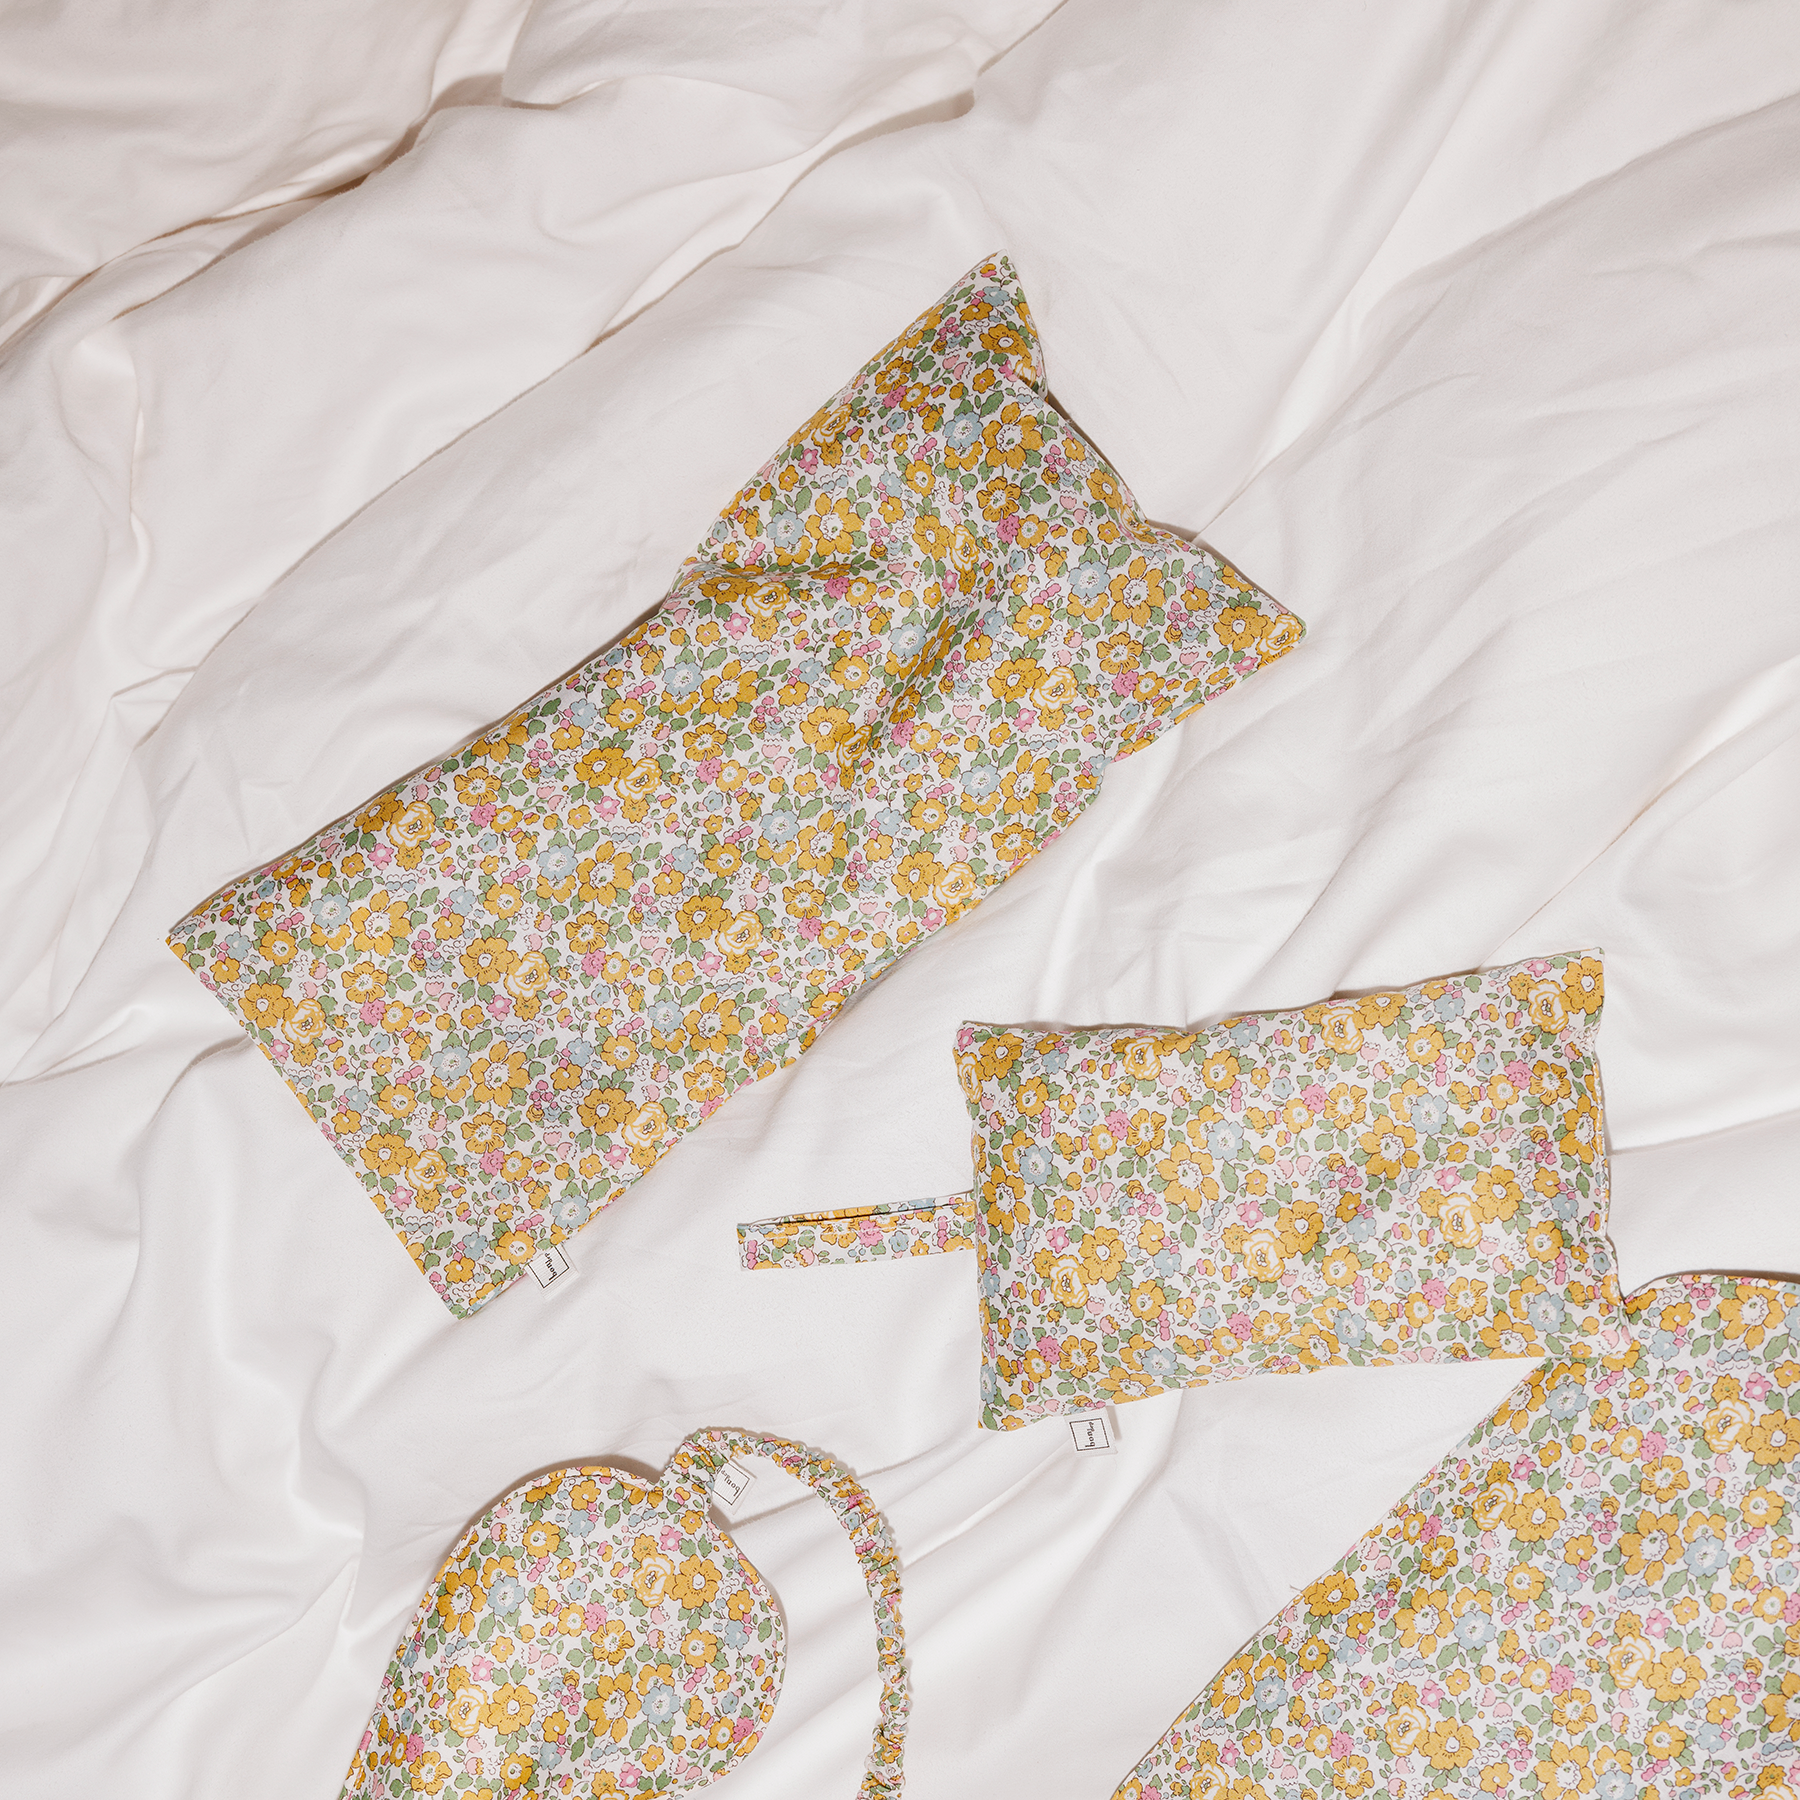 RELAXING EYEPILLOW MADE WITH LIBERTY BETSY ANN